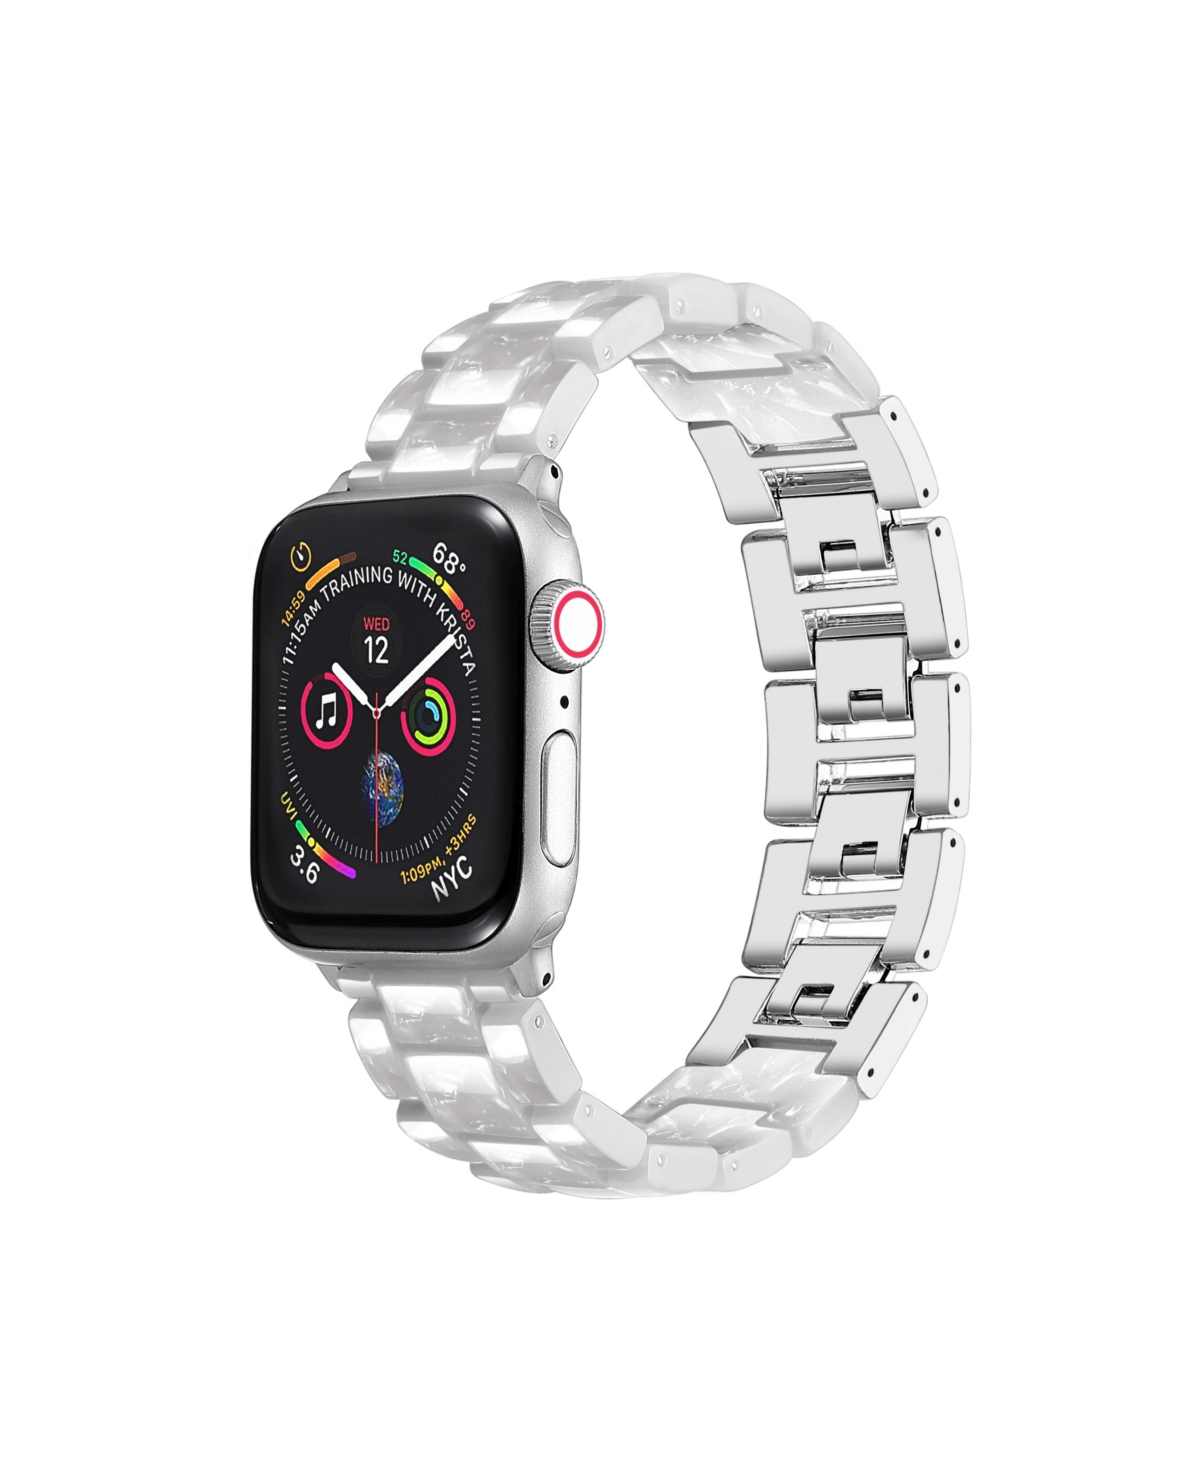 Men's and Women's Resin Band for Apple Watch with Removable Clasp 42mm - Multi